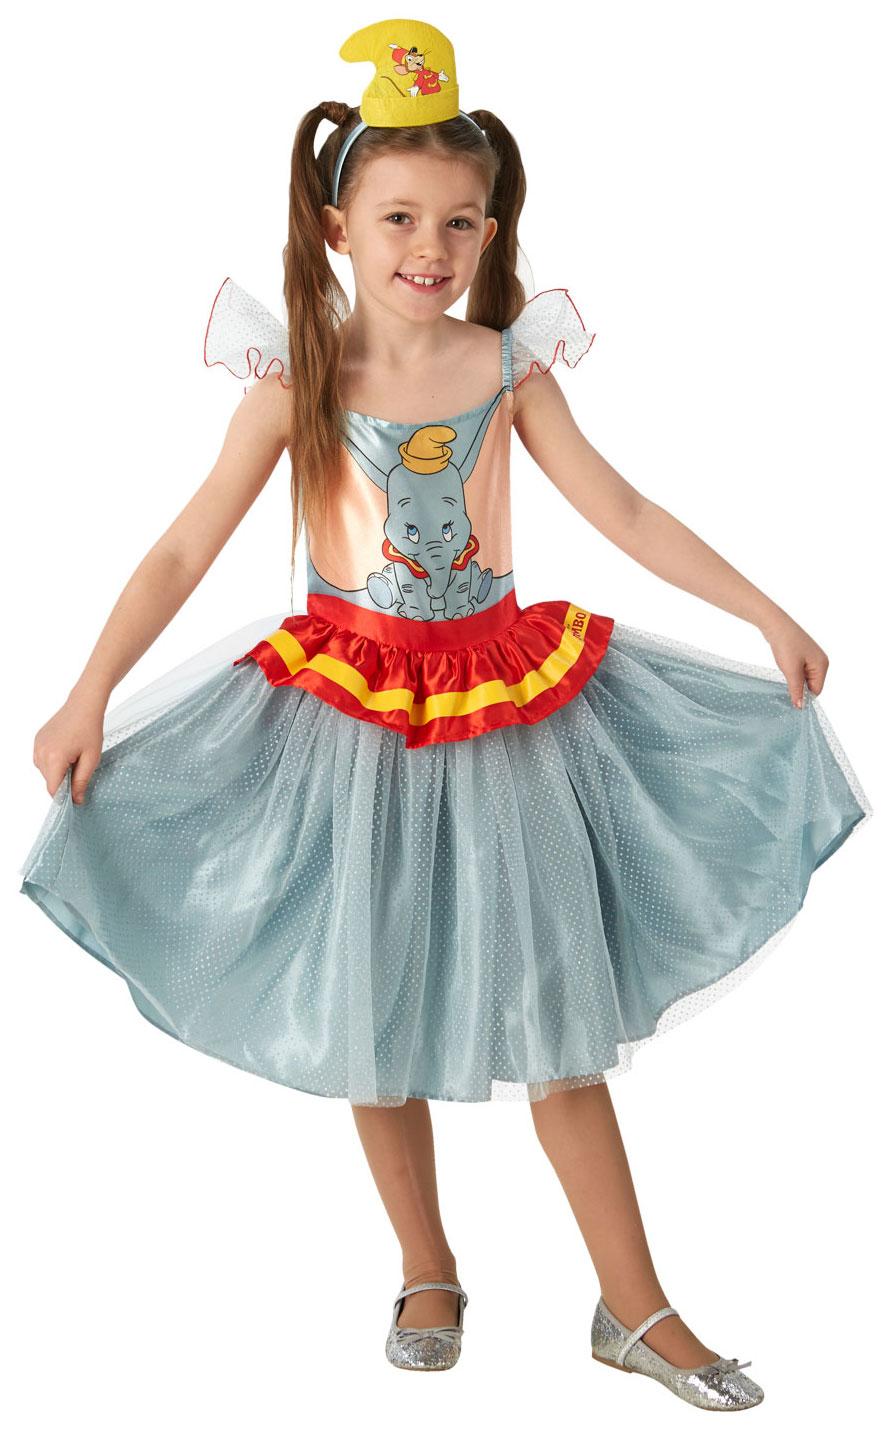 Disney's Dumbo TuTu Dress Fancy Dress Costume by Rubies 300265 available here at Karnival Costumes online party shop